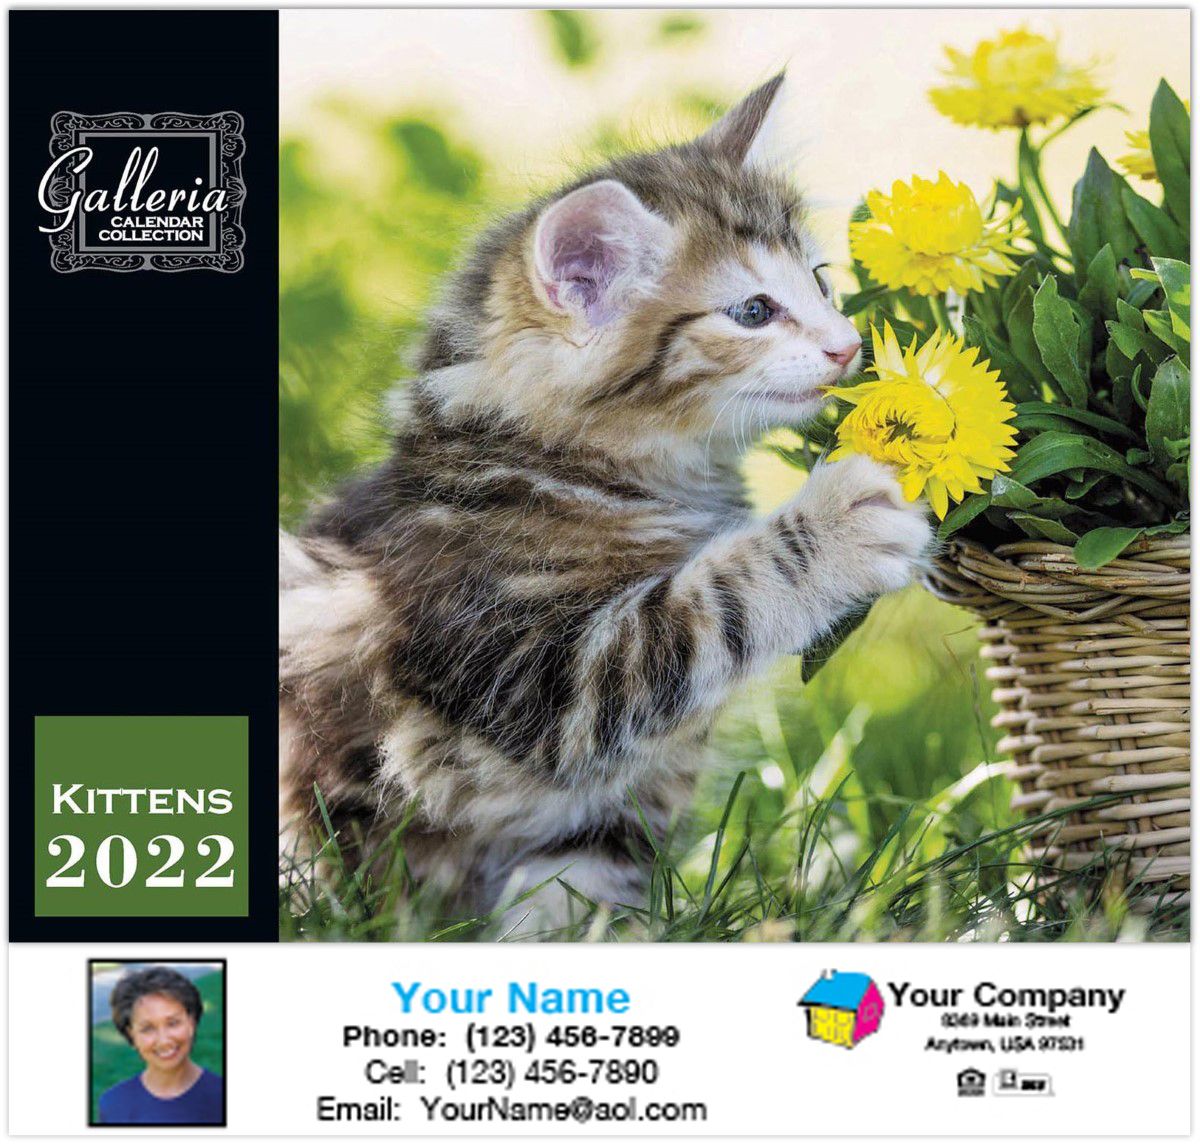 ReaMark Products: Kittens